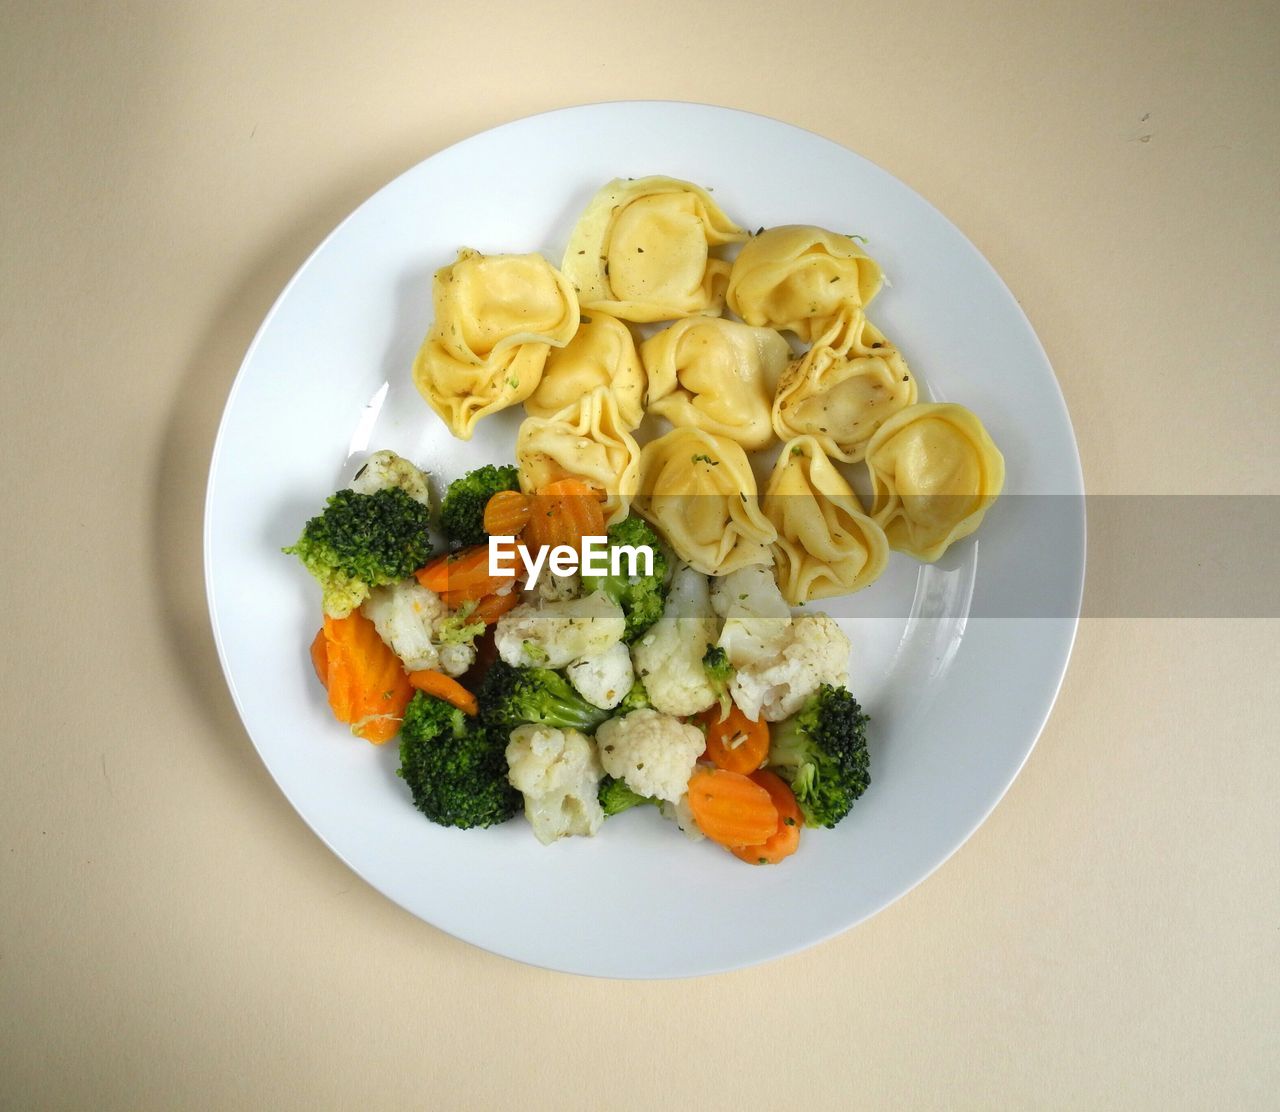 High angle view of dumplings with salad in plate